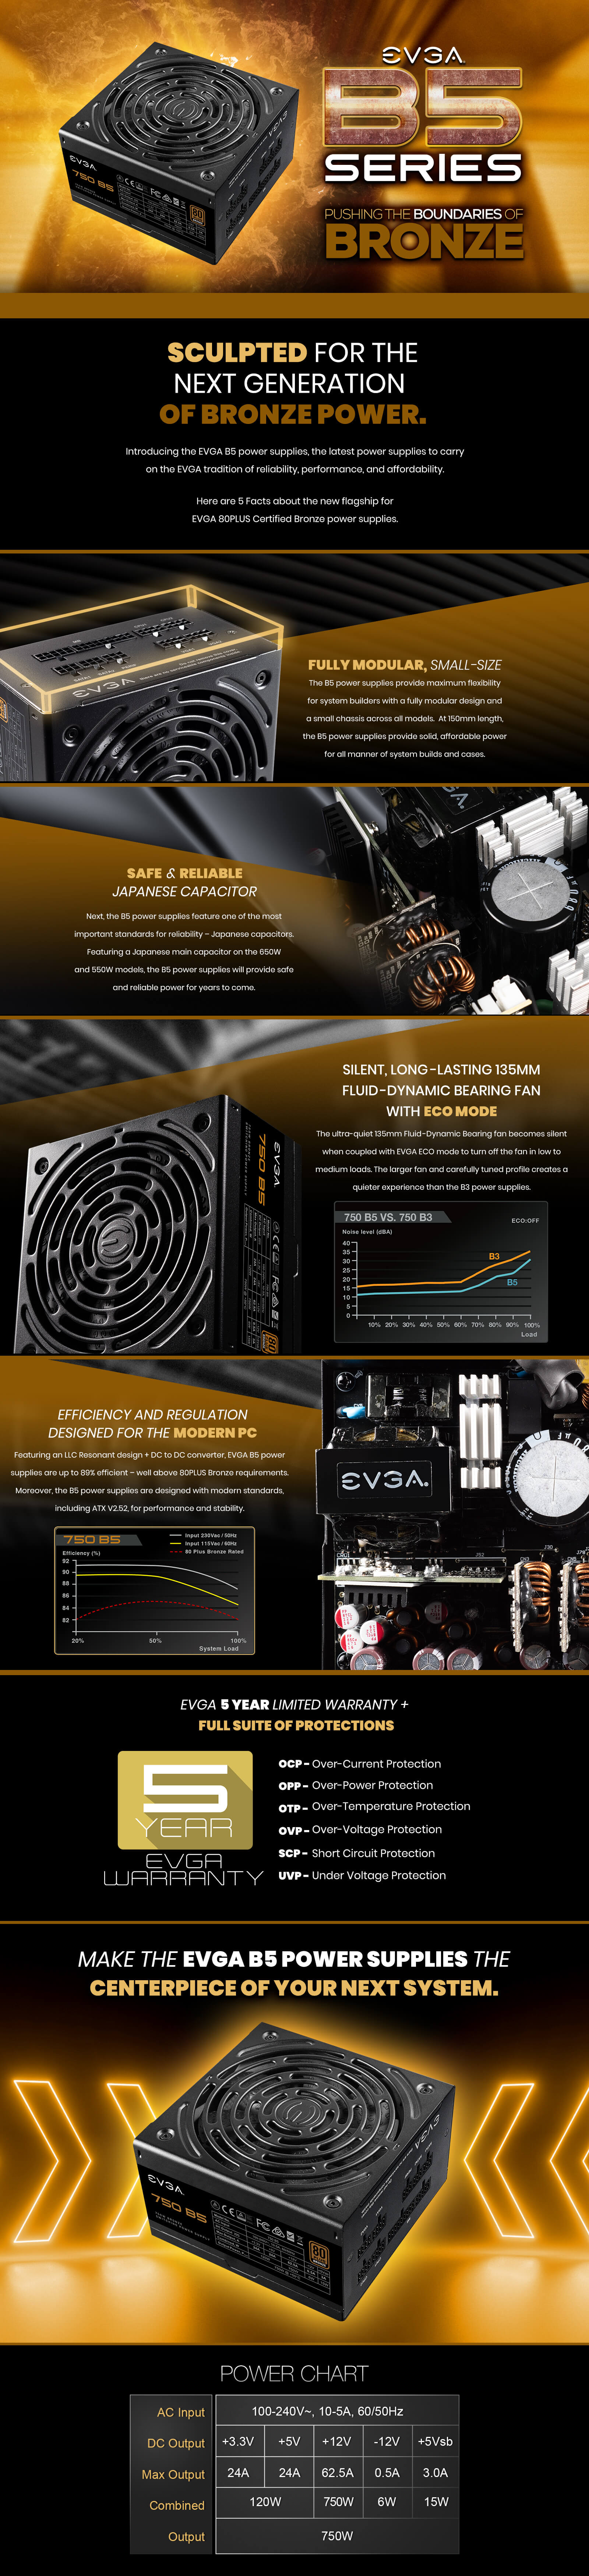 View detailed feature information for EVGA 750 B5, 80 Plus BRONZE 750W, Fully Modular, EVGA ECO Mode, 5 Year Warranty, Compact 150mm Size, Power Supply 220-B5-0750-V1